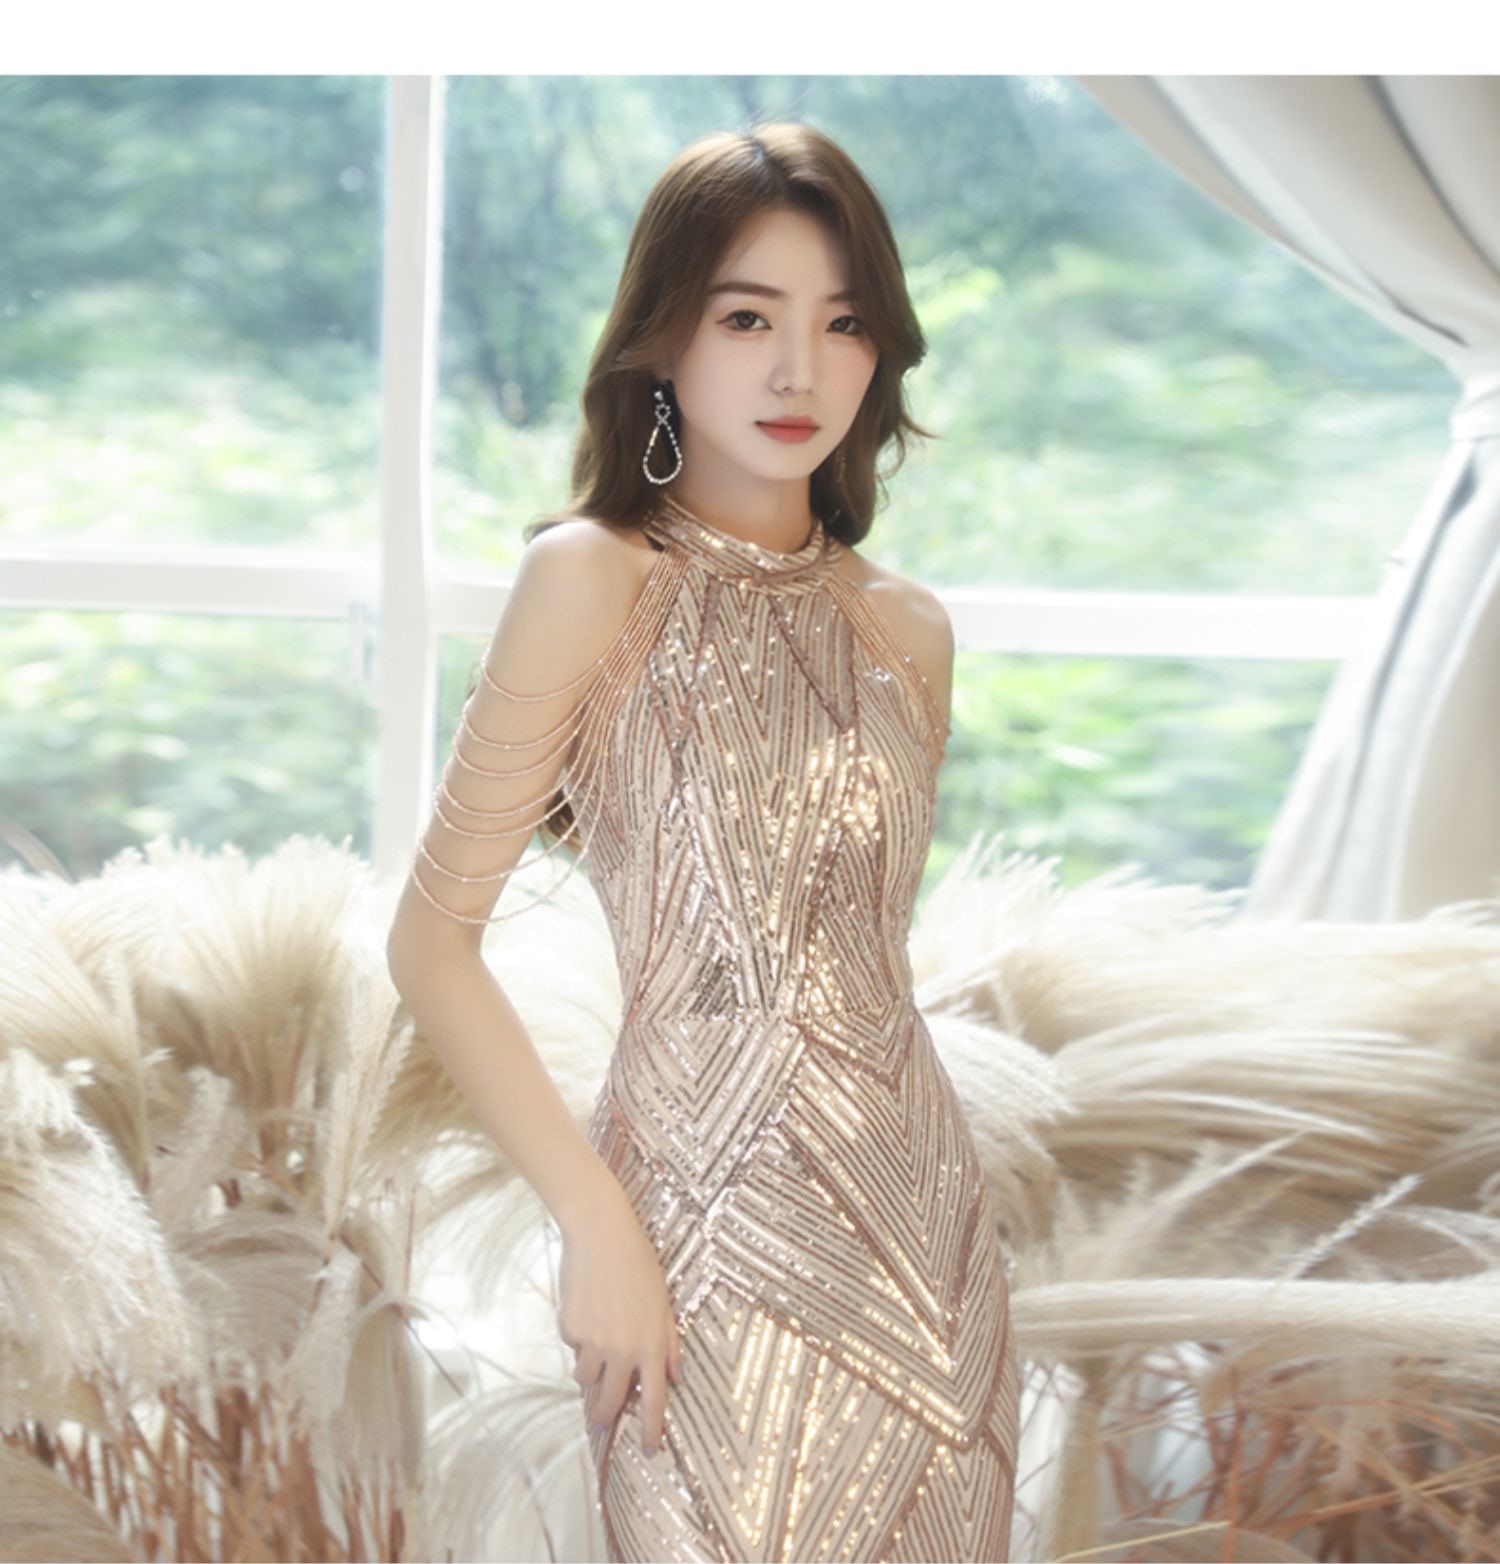 Luxury-Slim-Fit-Fishtail-Champagne-Banquet-Evening-Formal-Maxi-Dress11